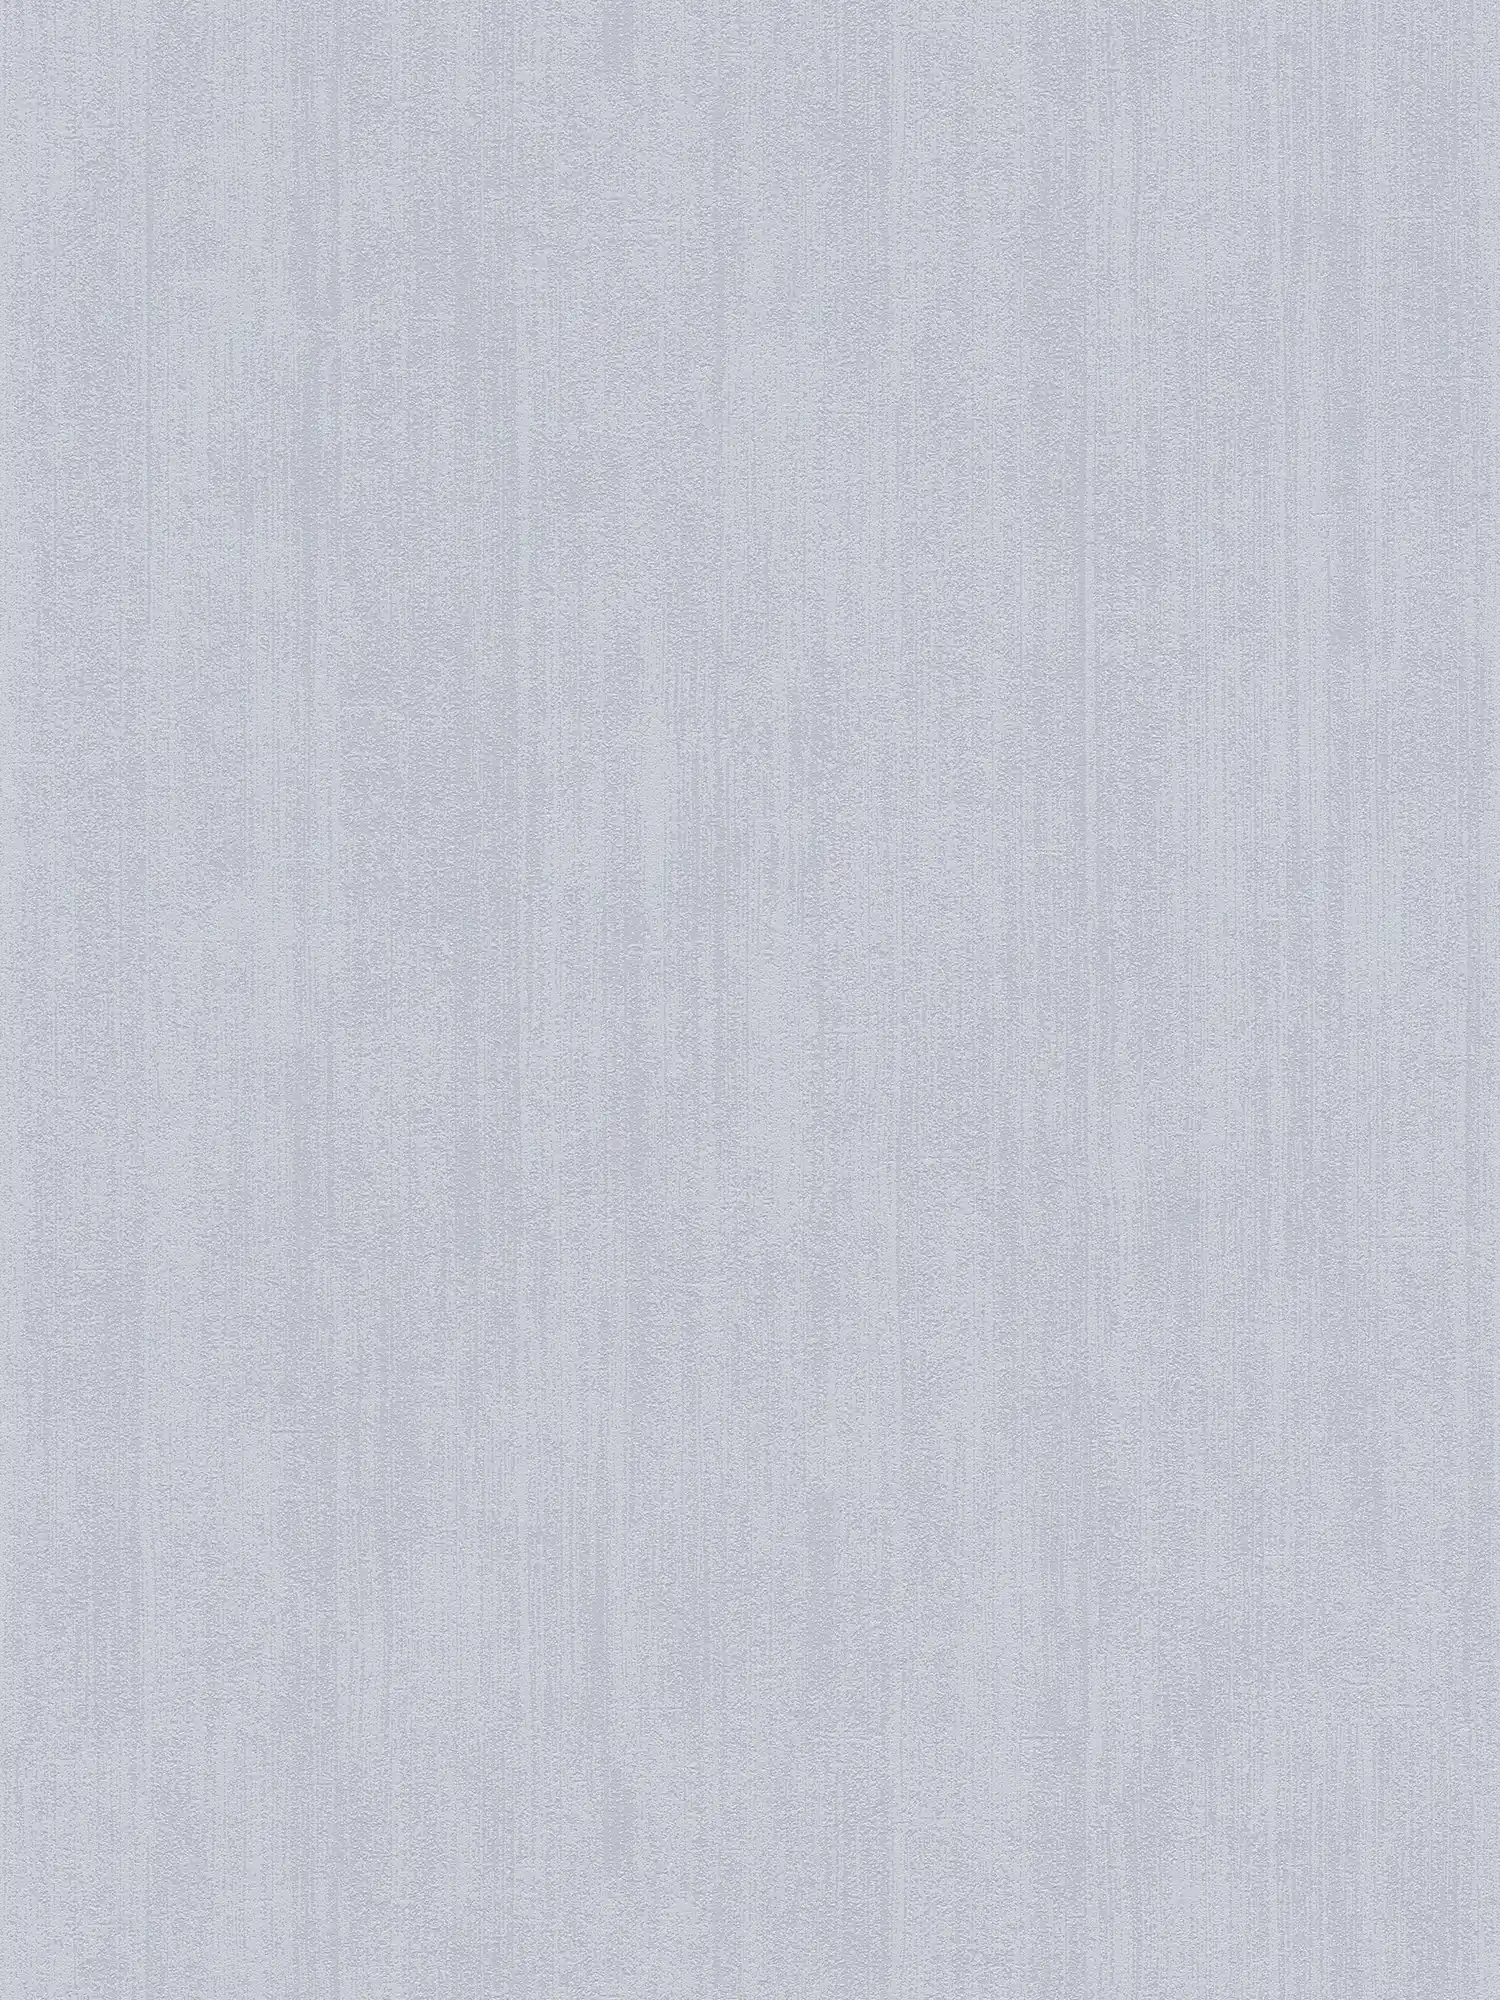 Plain non-woven wallpaper with tone-on-tone hatching - grey
